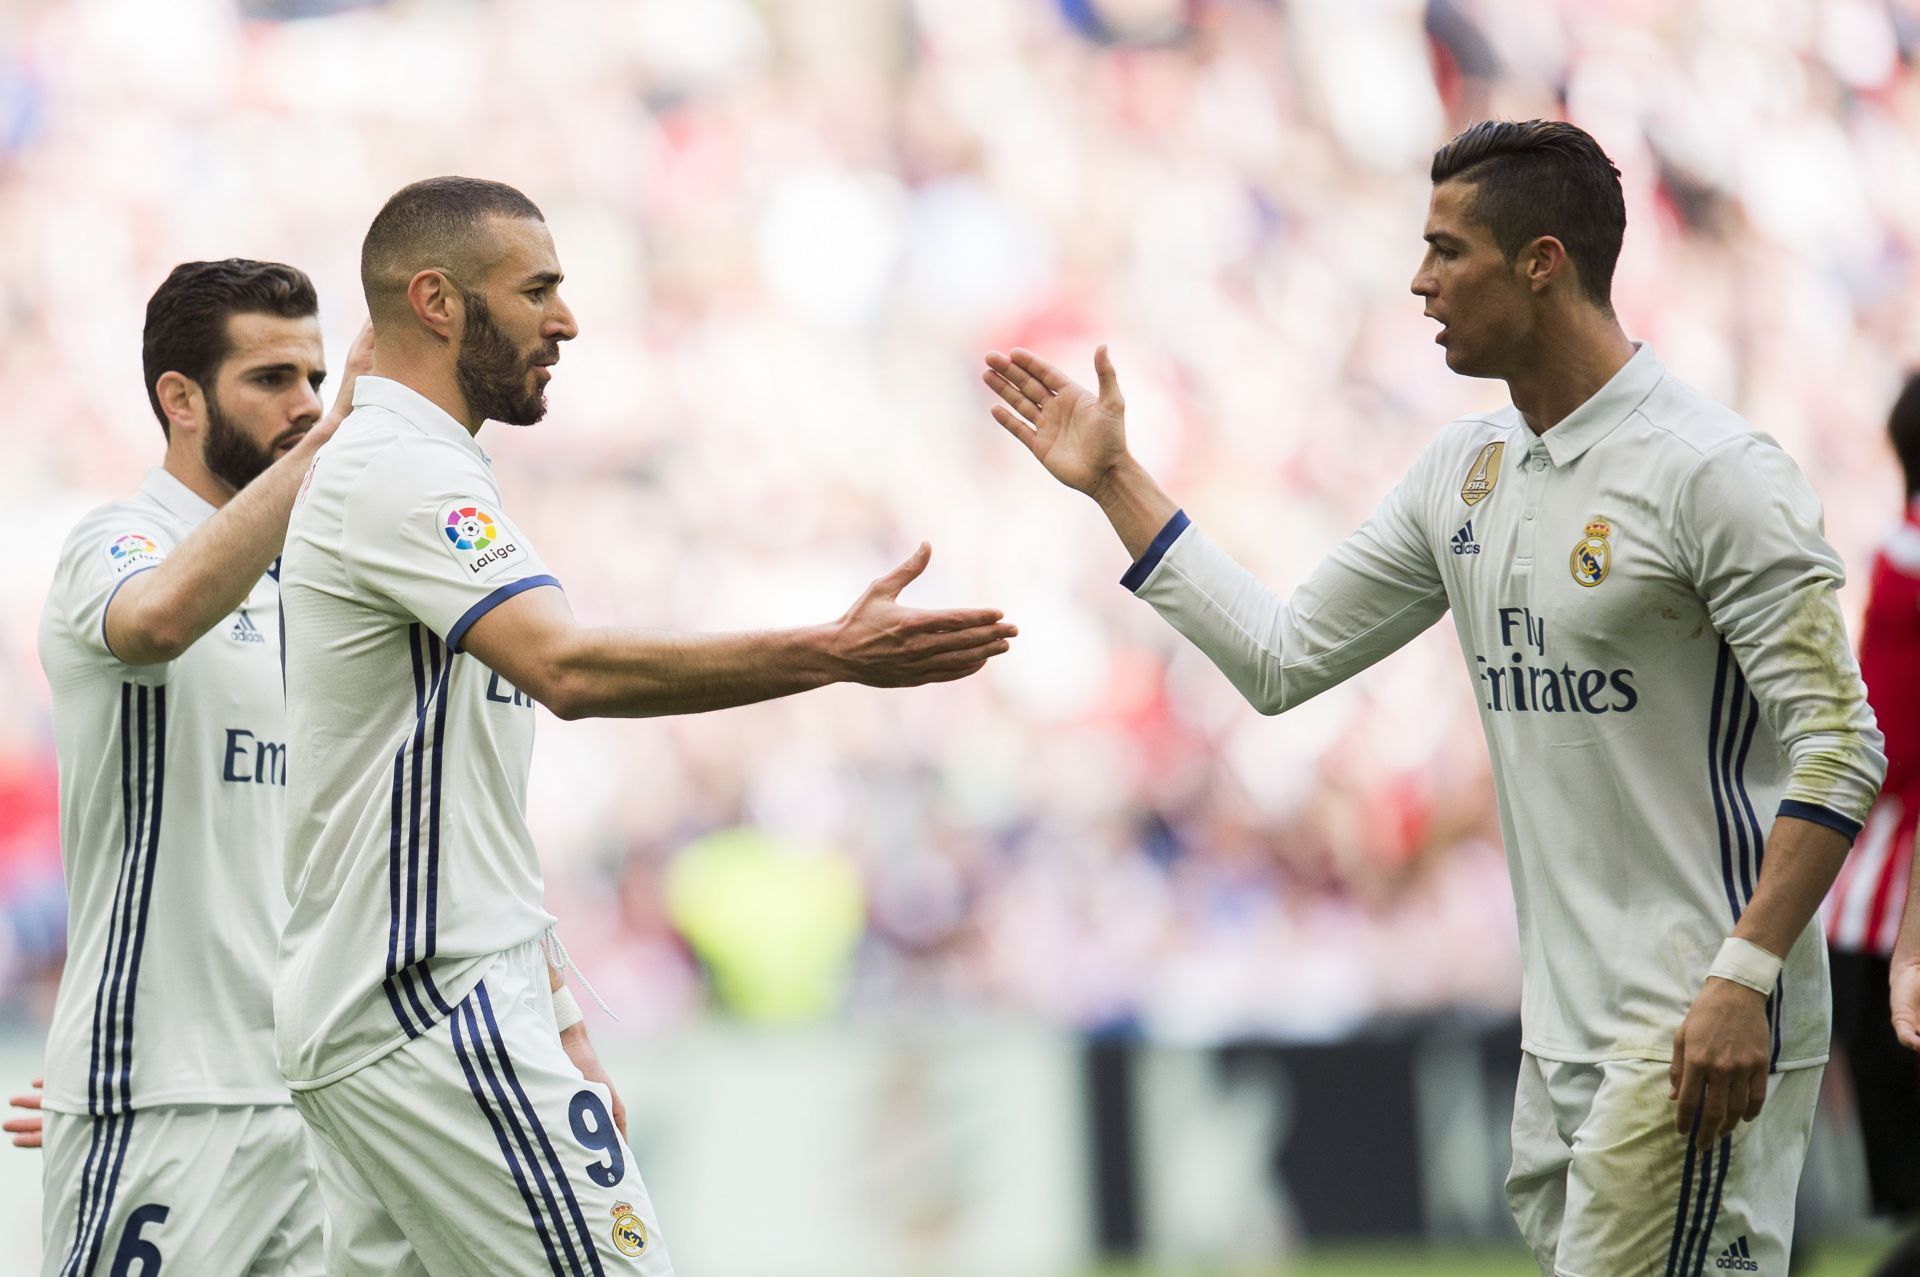 The duo had a successful spell during their time together at Real Madrid.